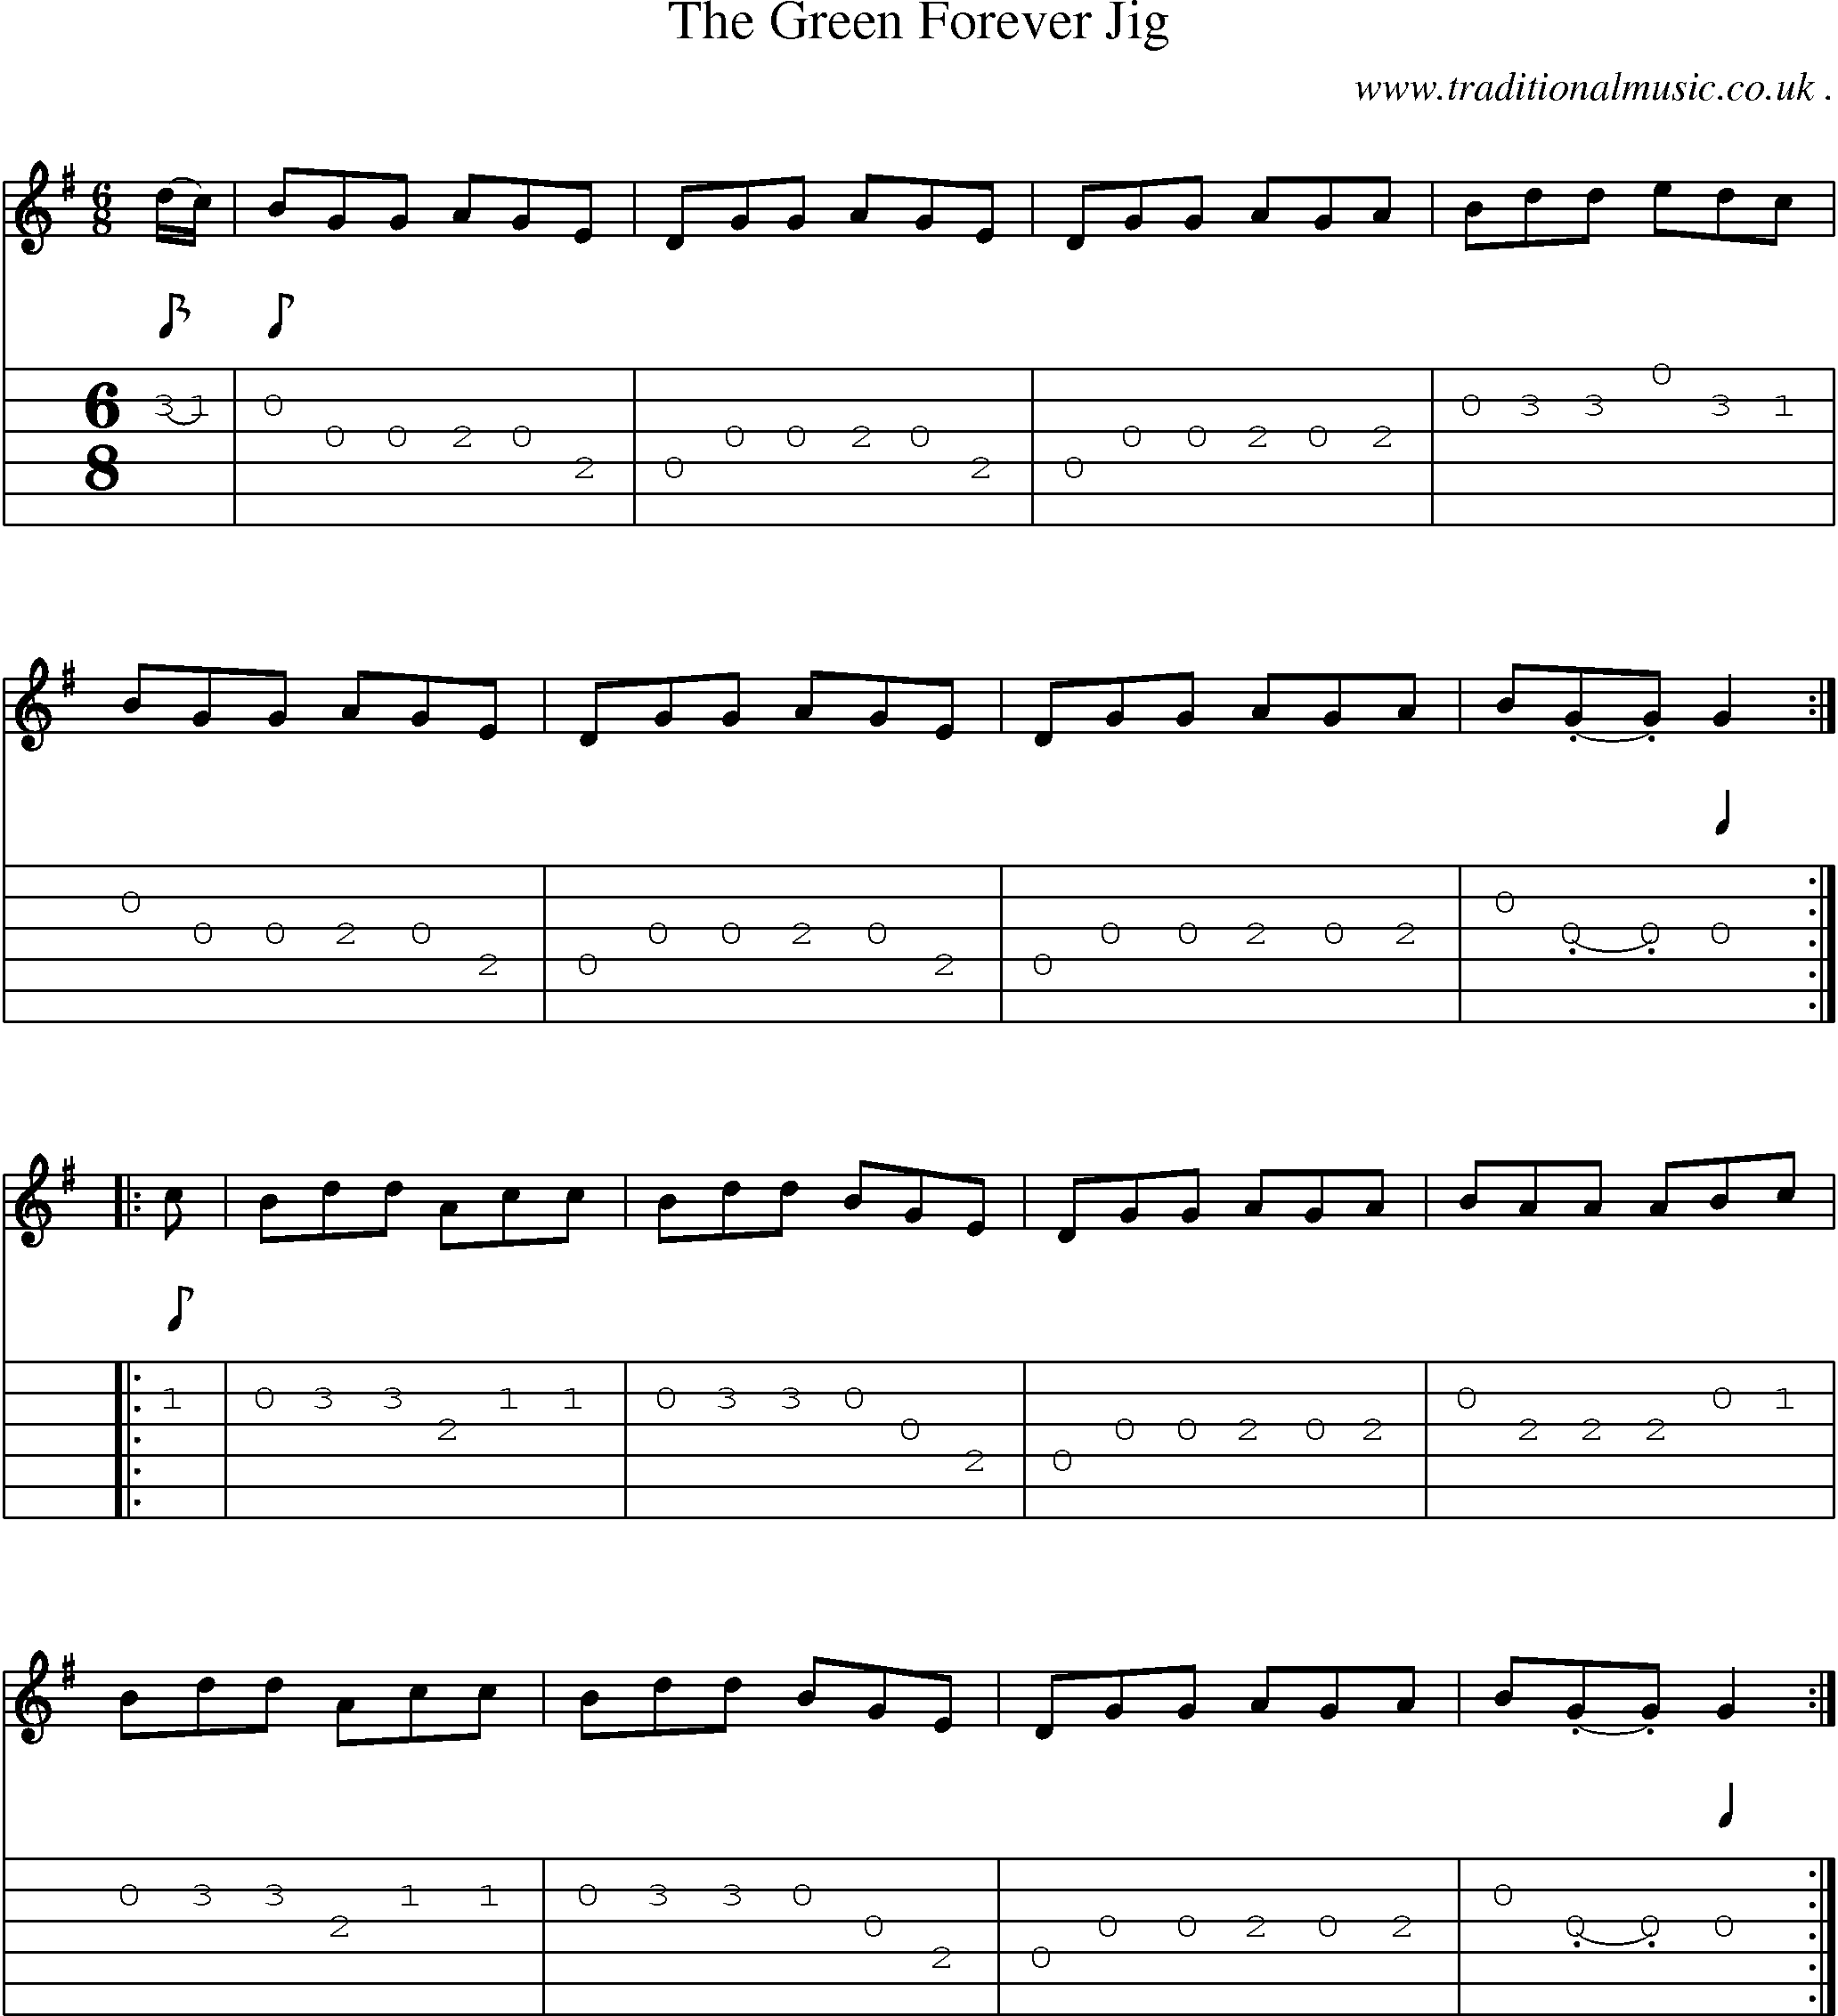 Sheet-Music and Guitar Tabs for The Green Forever Jig